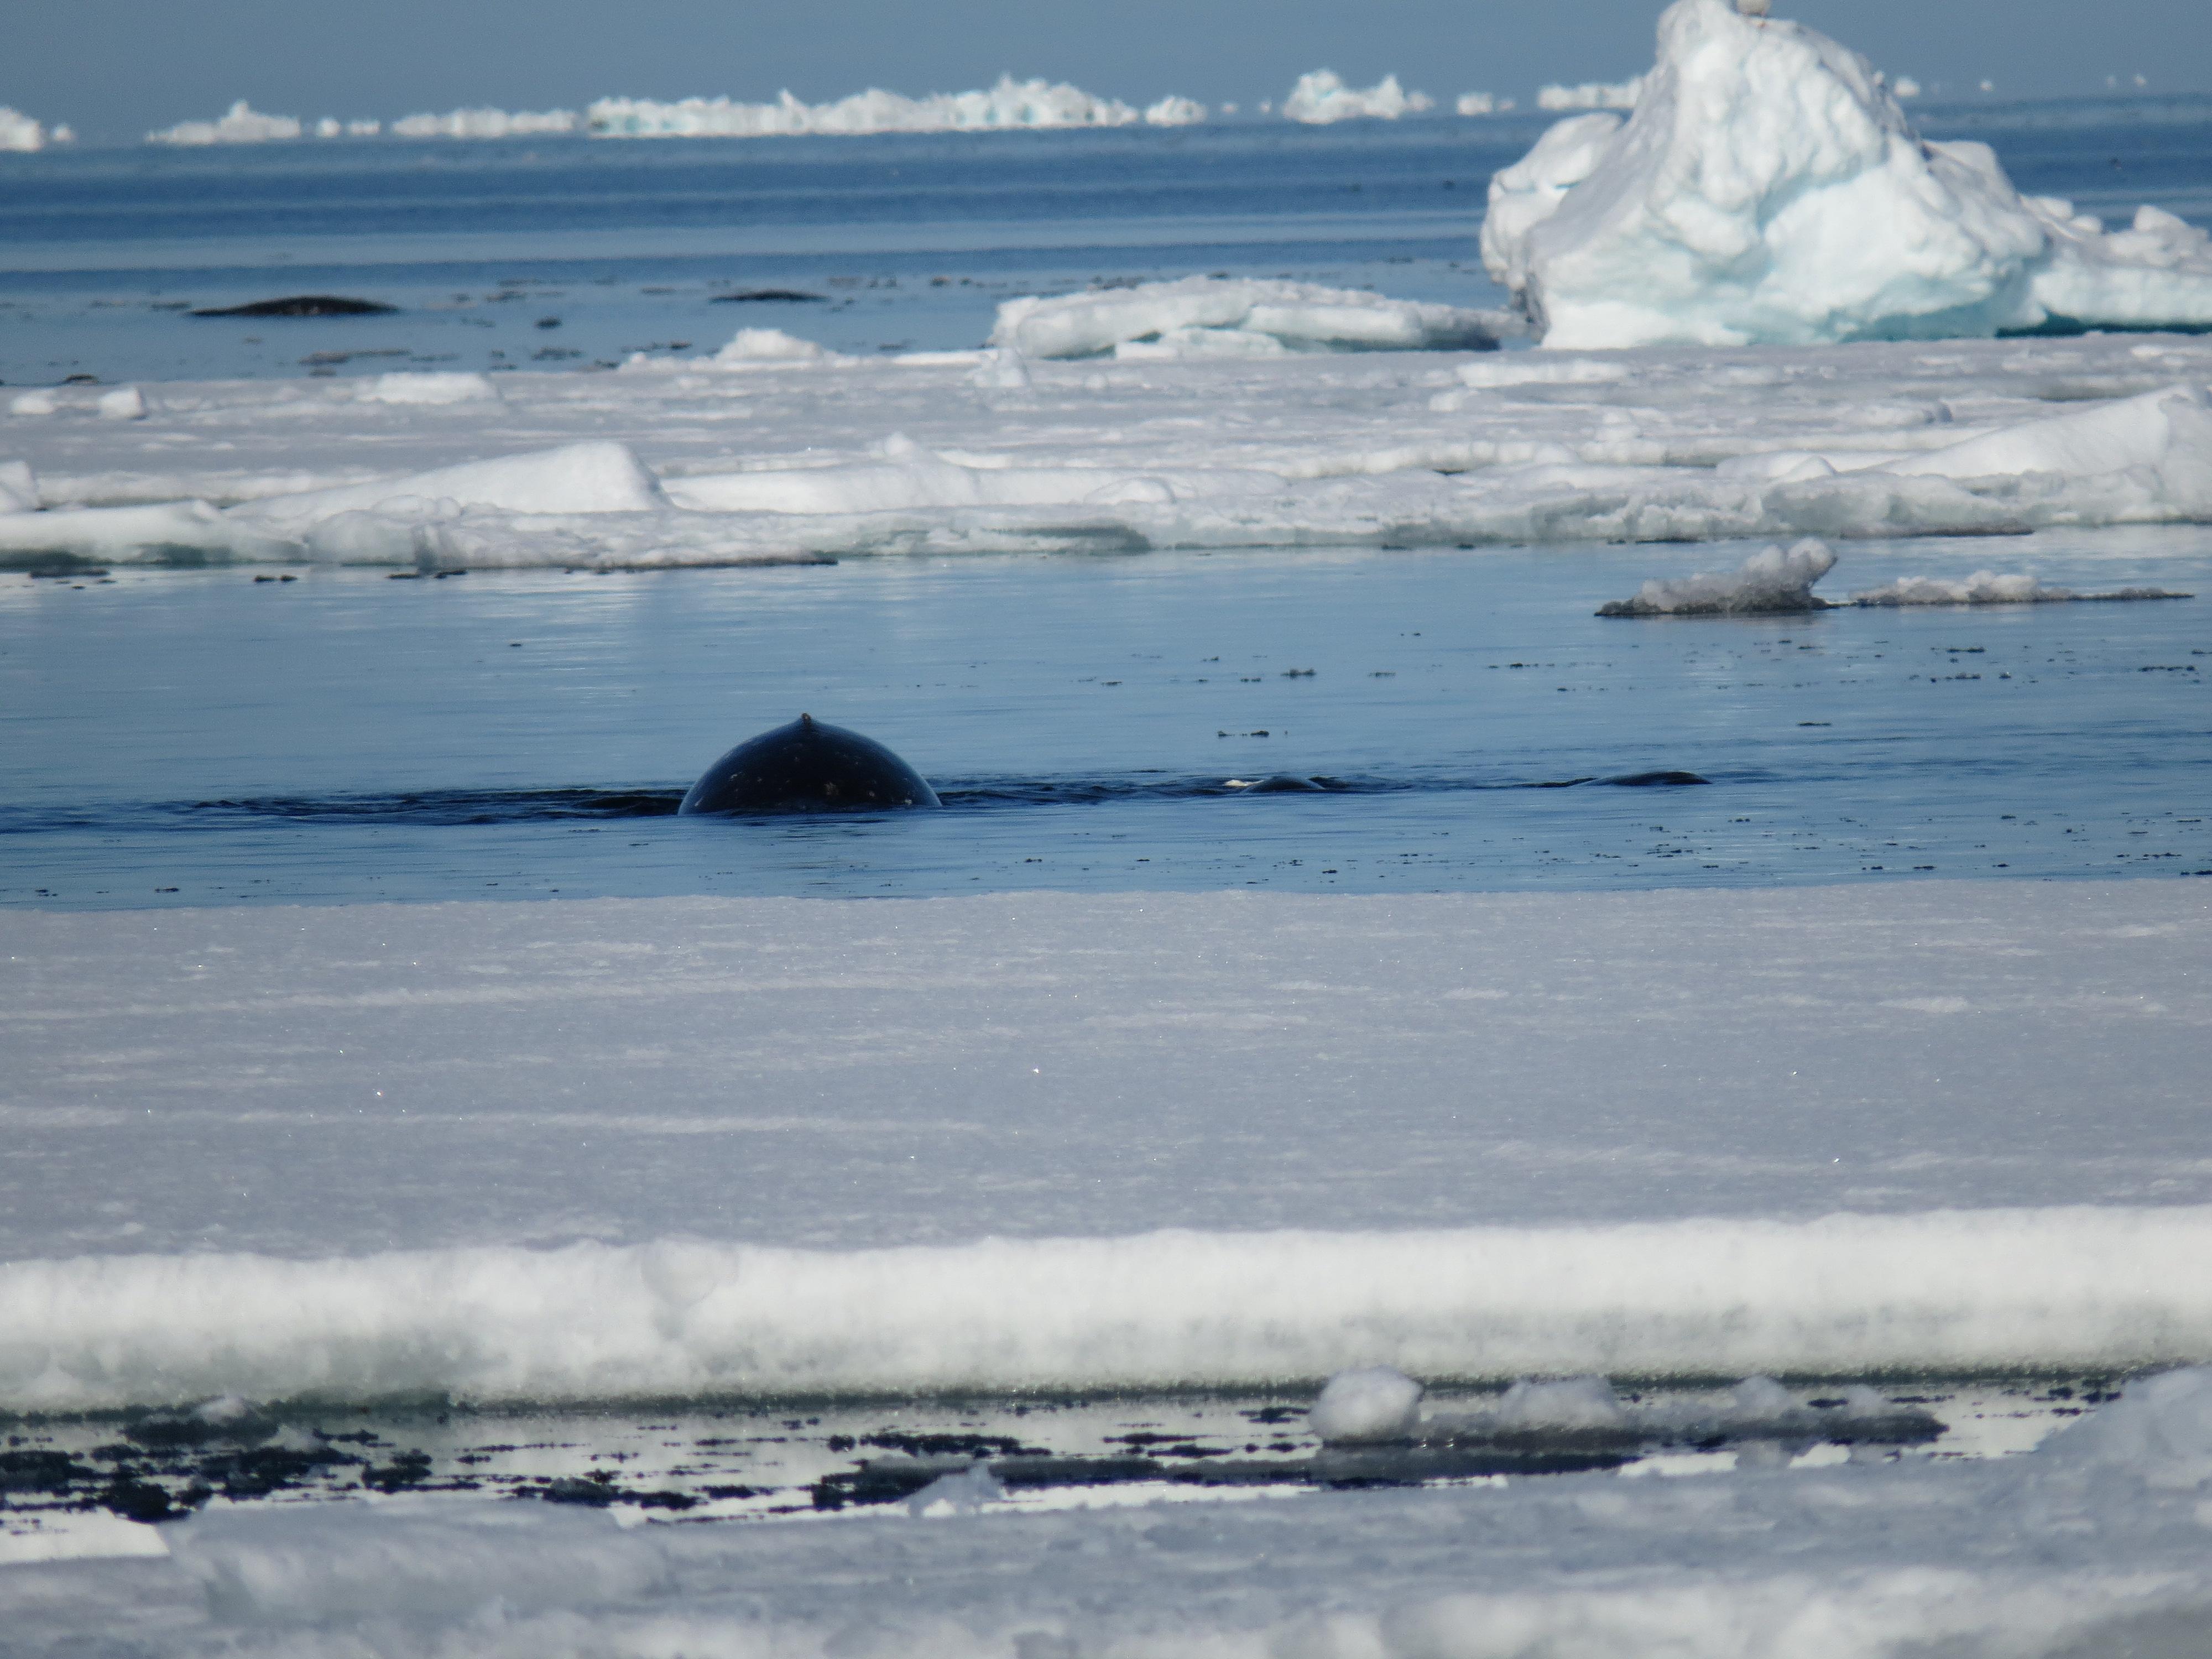 A Narwhal surfaces near sea ice floe edge, Pond Inlet, Nunavut, Canada.